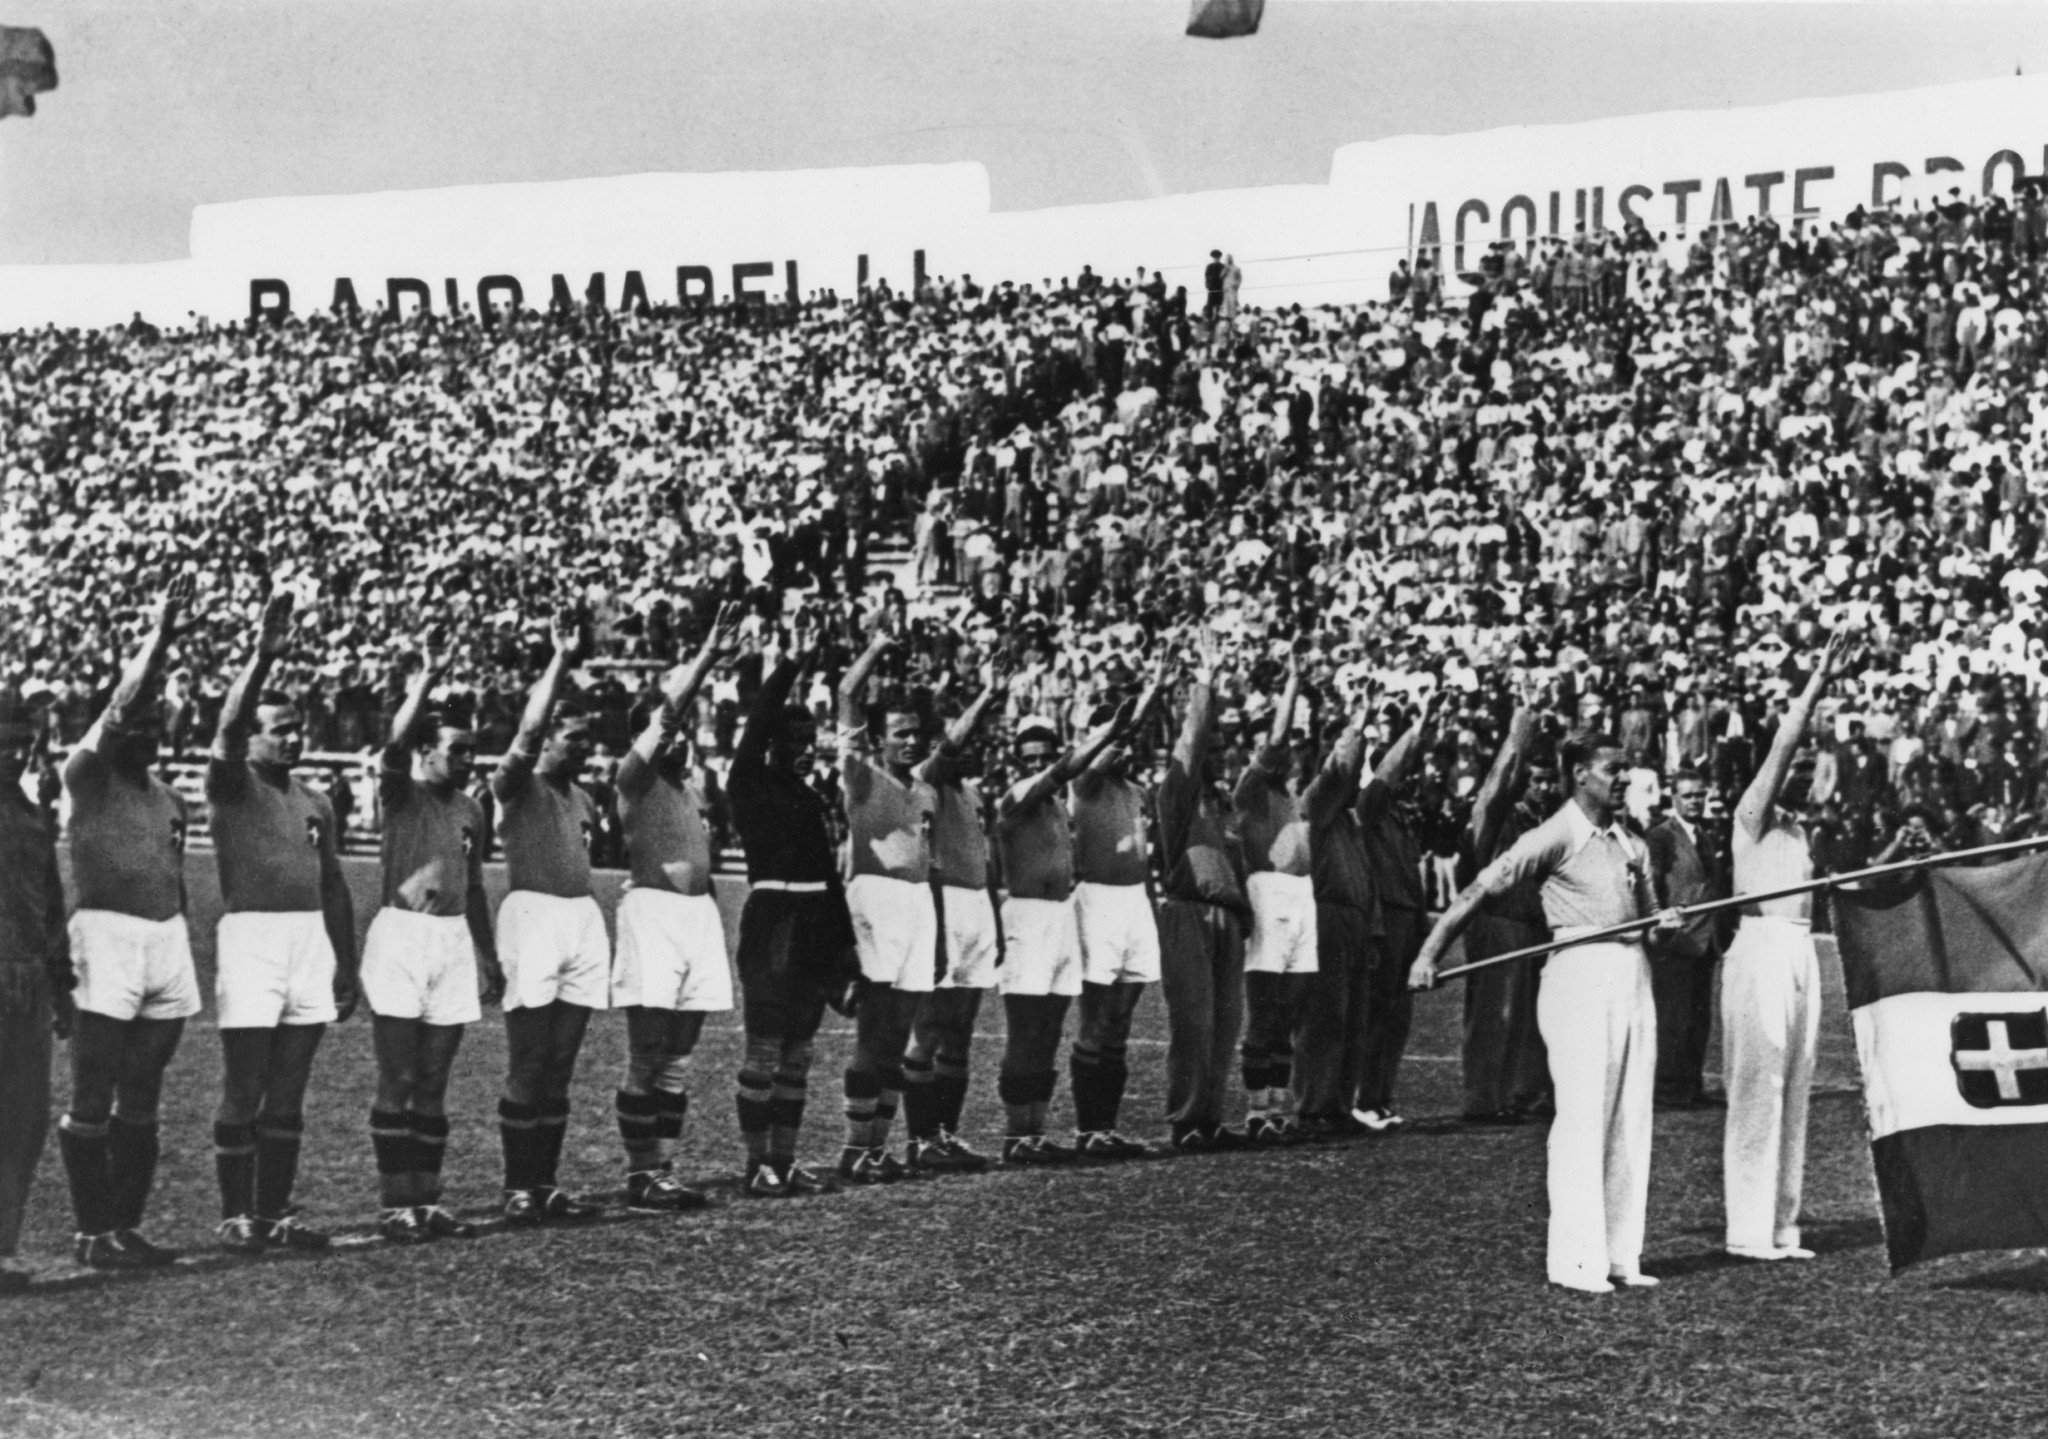 Italy's football team offer up a fascist salute at the 1934 FIFA World Cup ©Getty Images